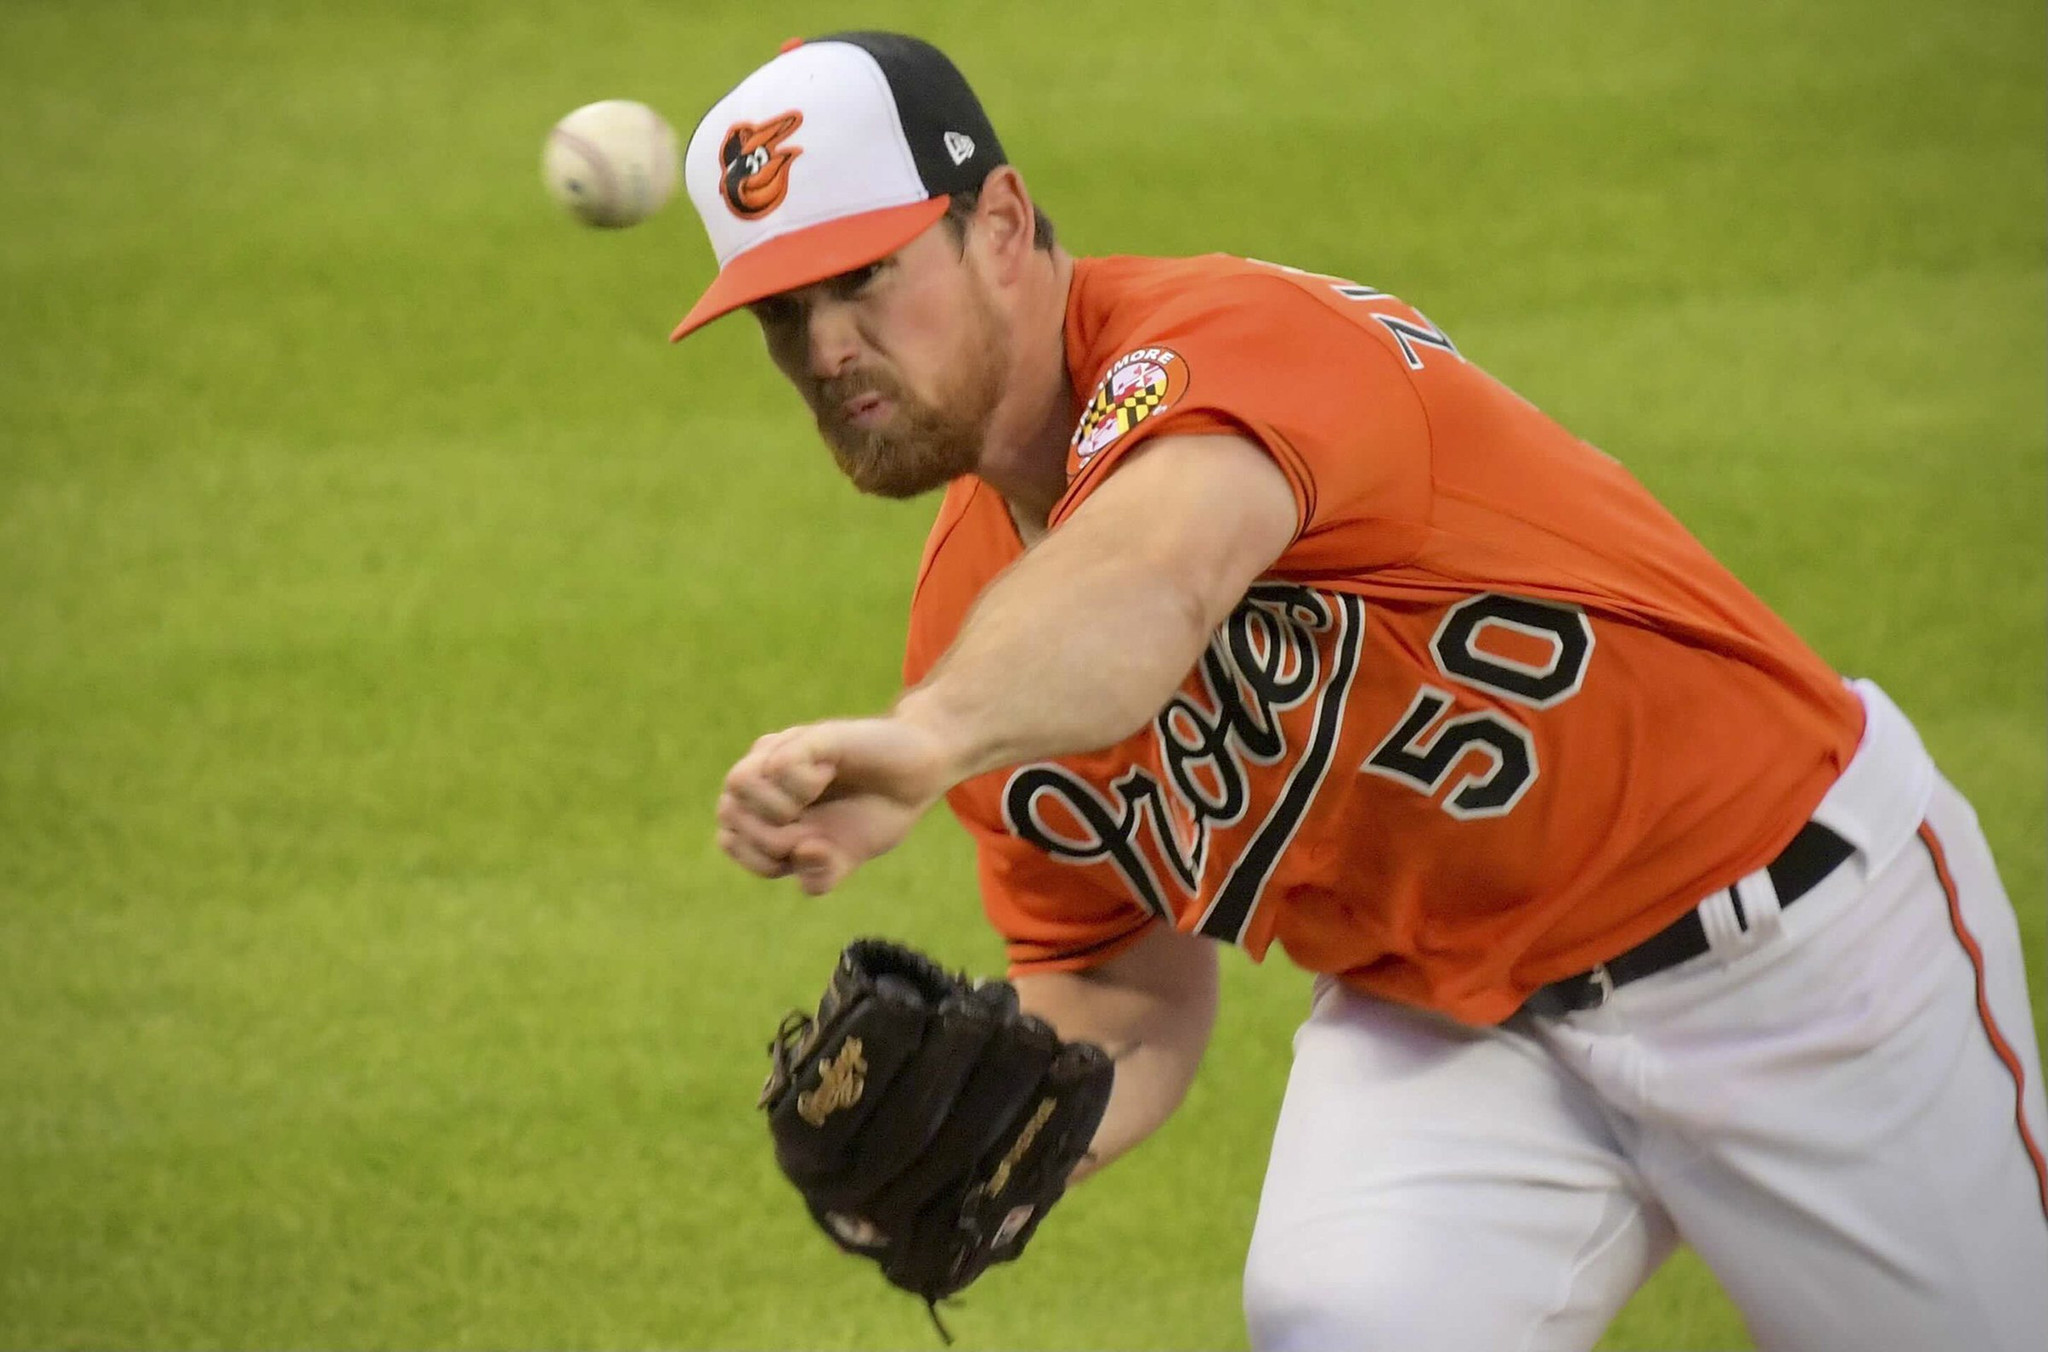 Bruce Zimmermann: Grit in the Baltimore Orioles' Rotation